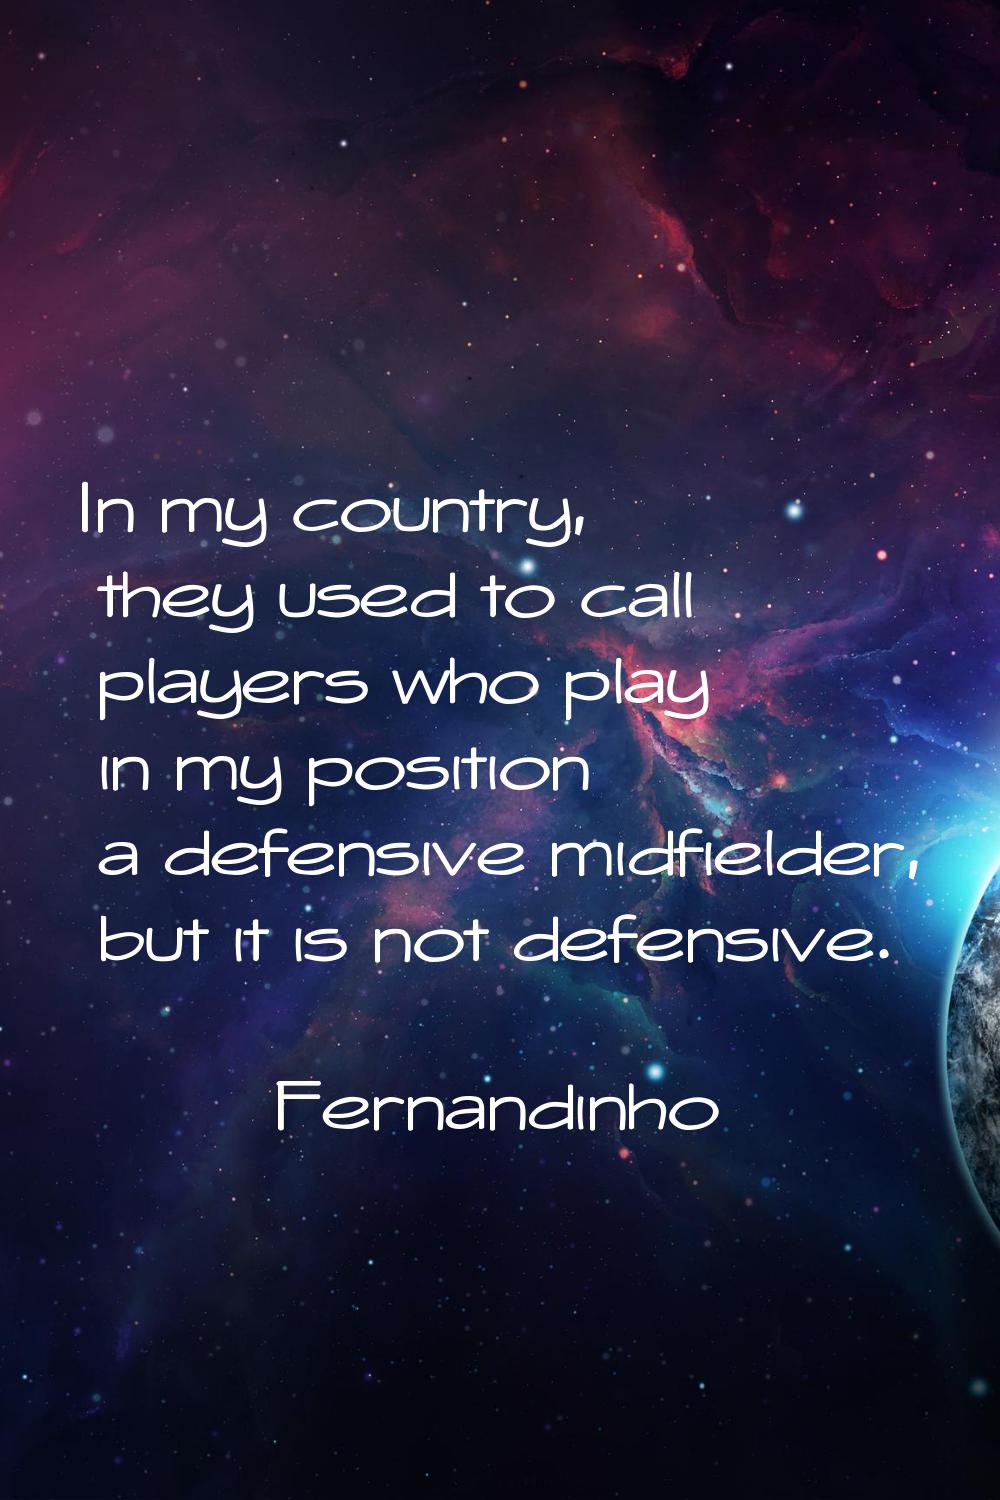 In my country, they used to call players who play in my position a defensive midfielder, but it is 